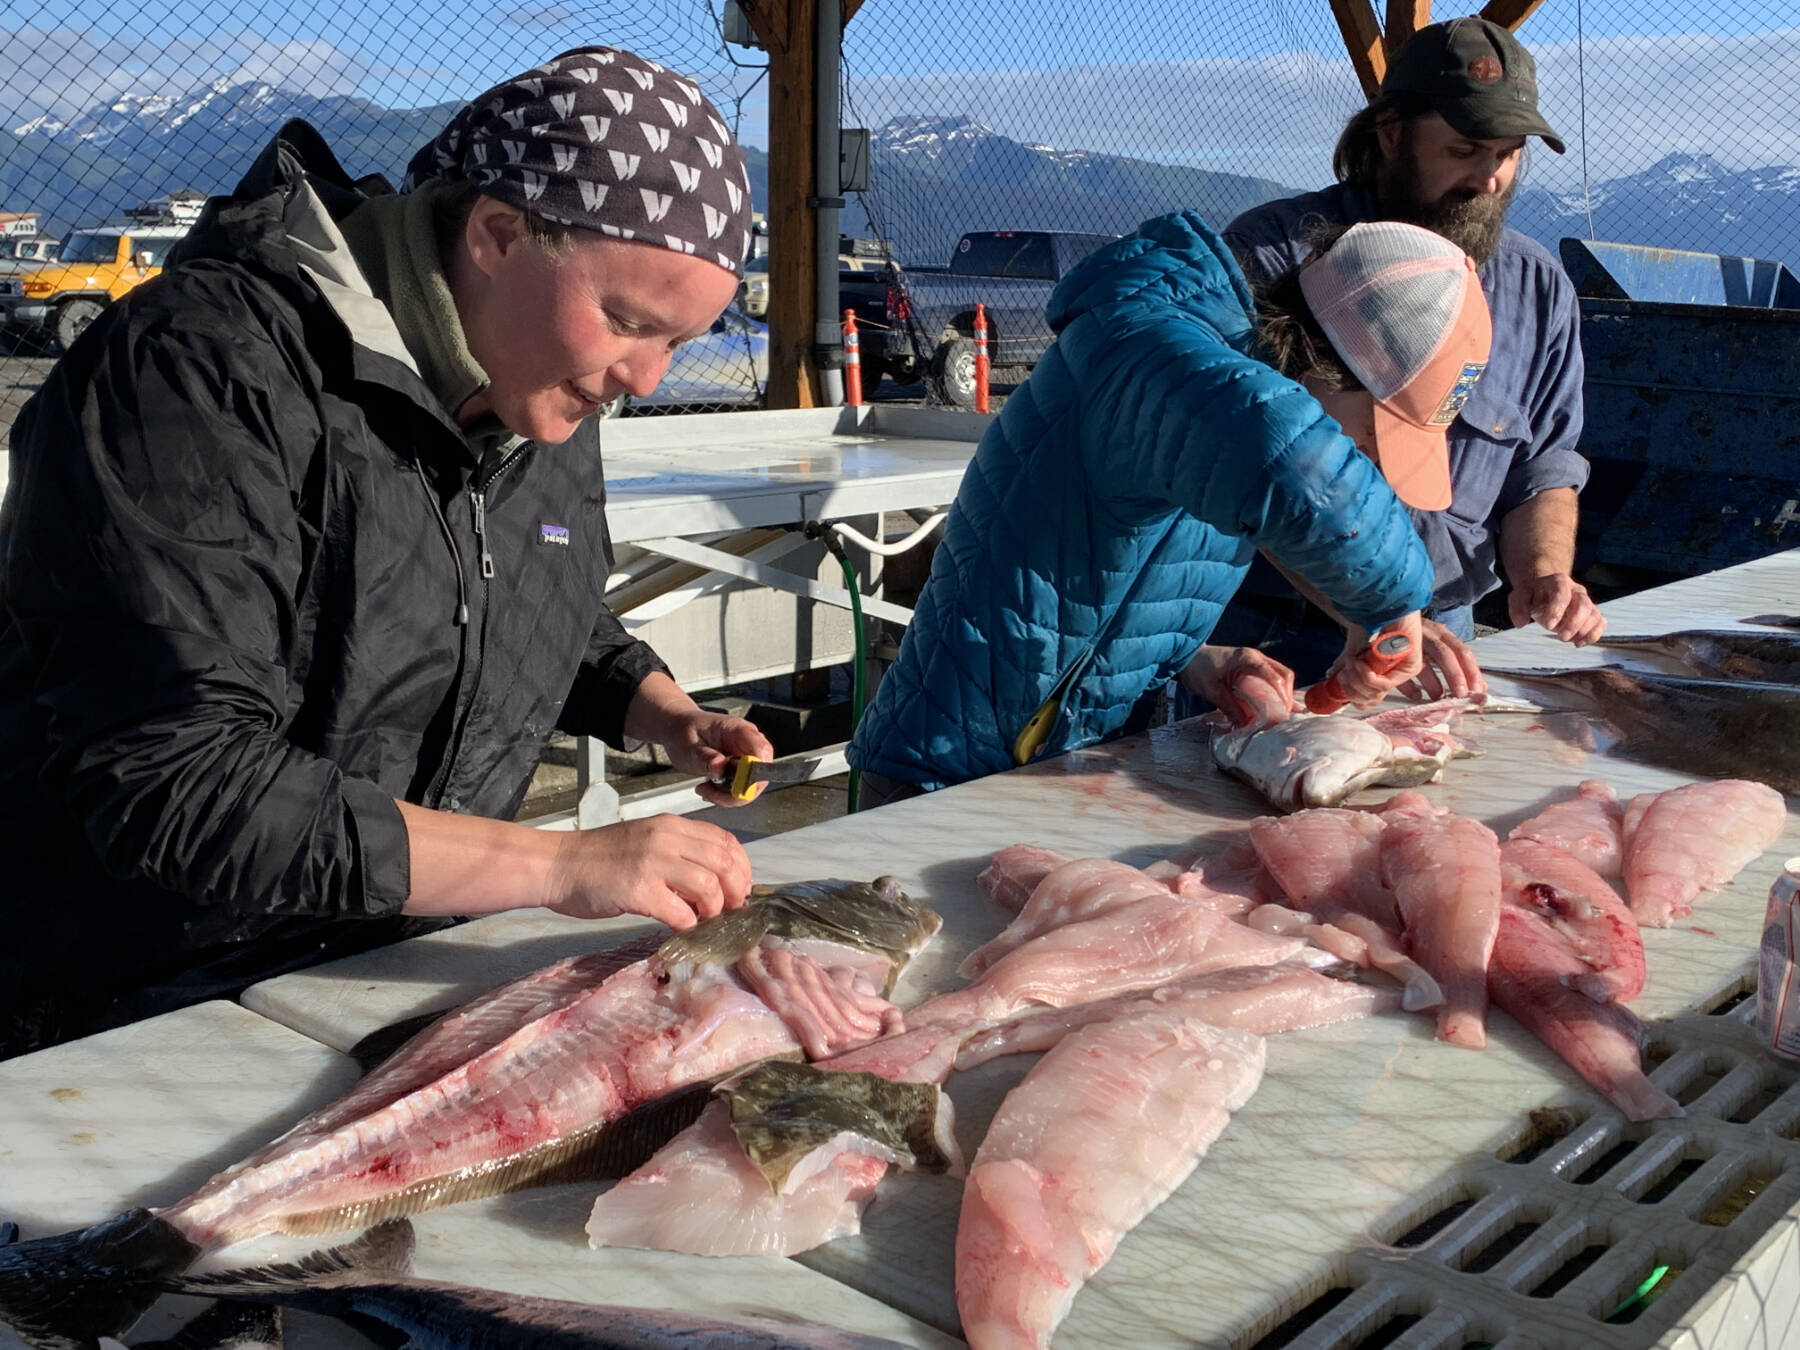 Visitors and community members clean a day’s catch of halibut at a fish cleaning station on Monday, July 3, 2023 on the Homer Spit in Homer, Alaska. Photo by Christina Whiting